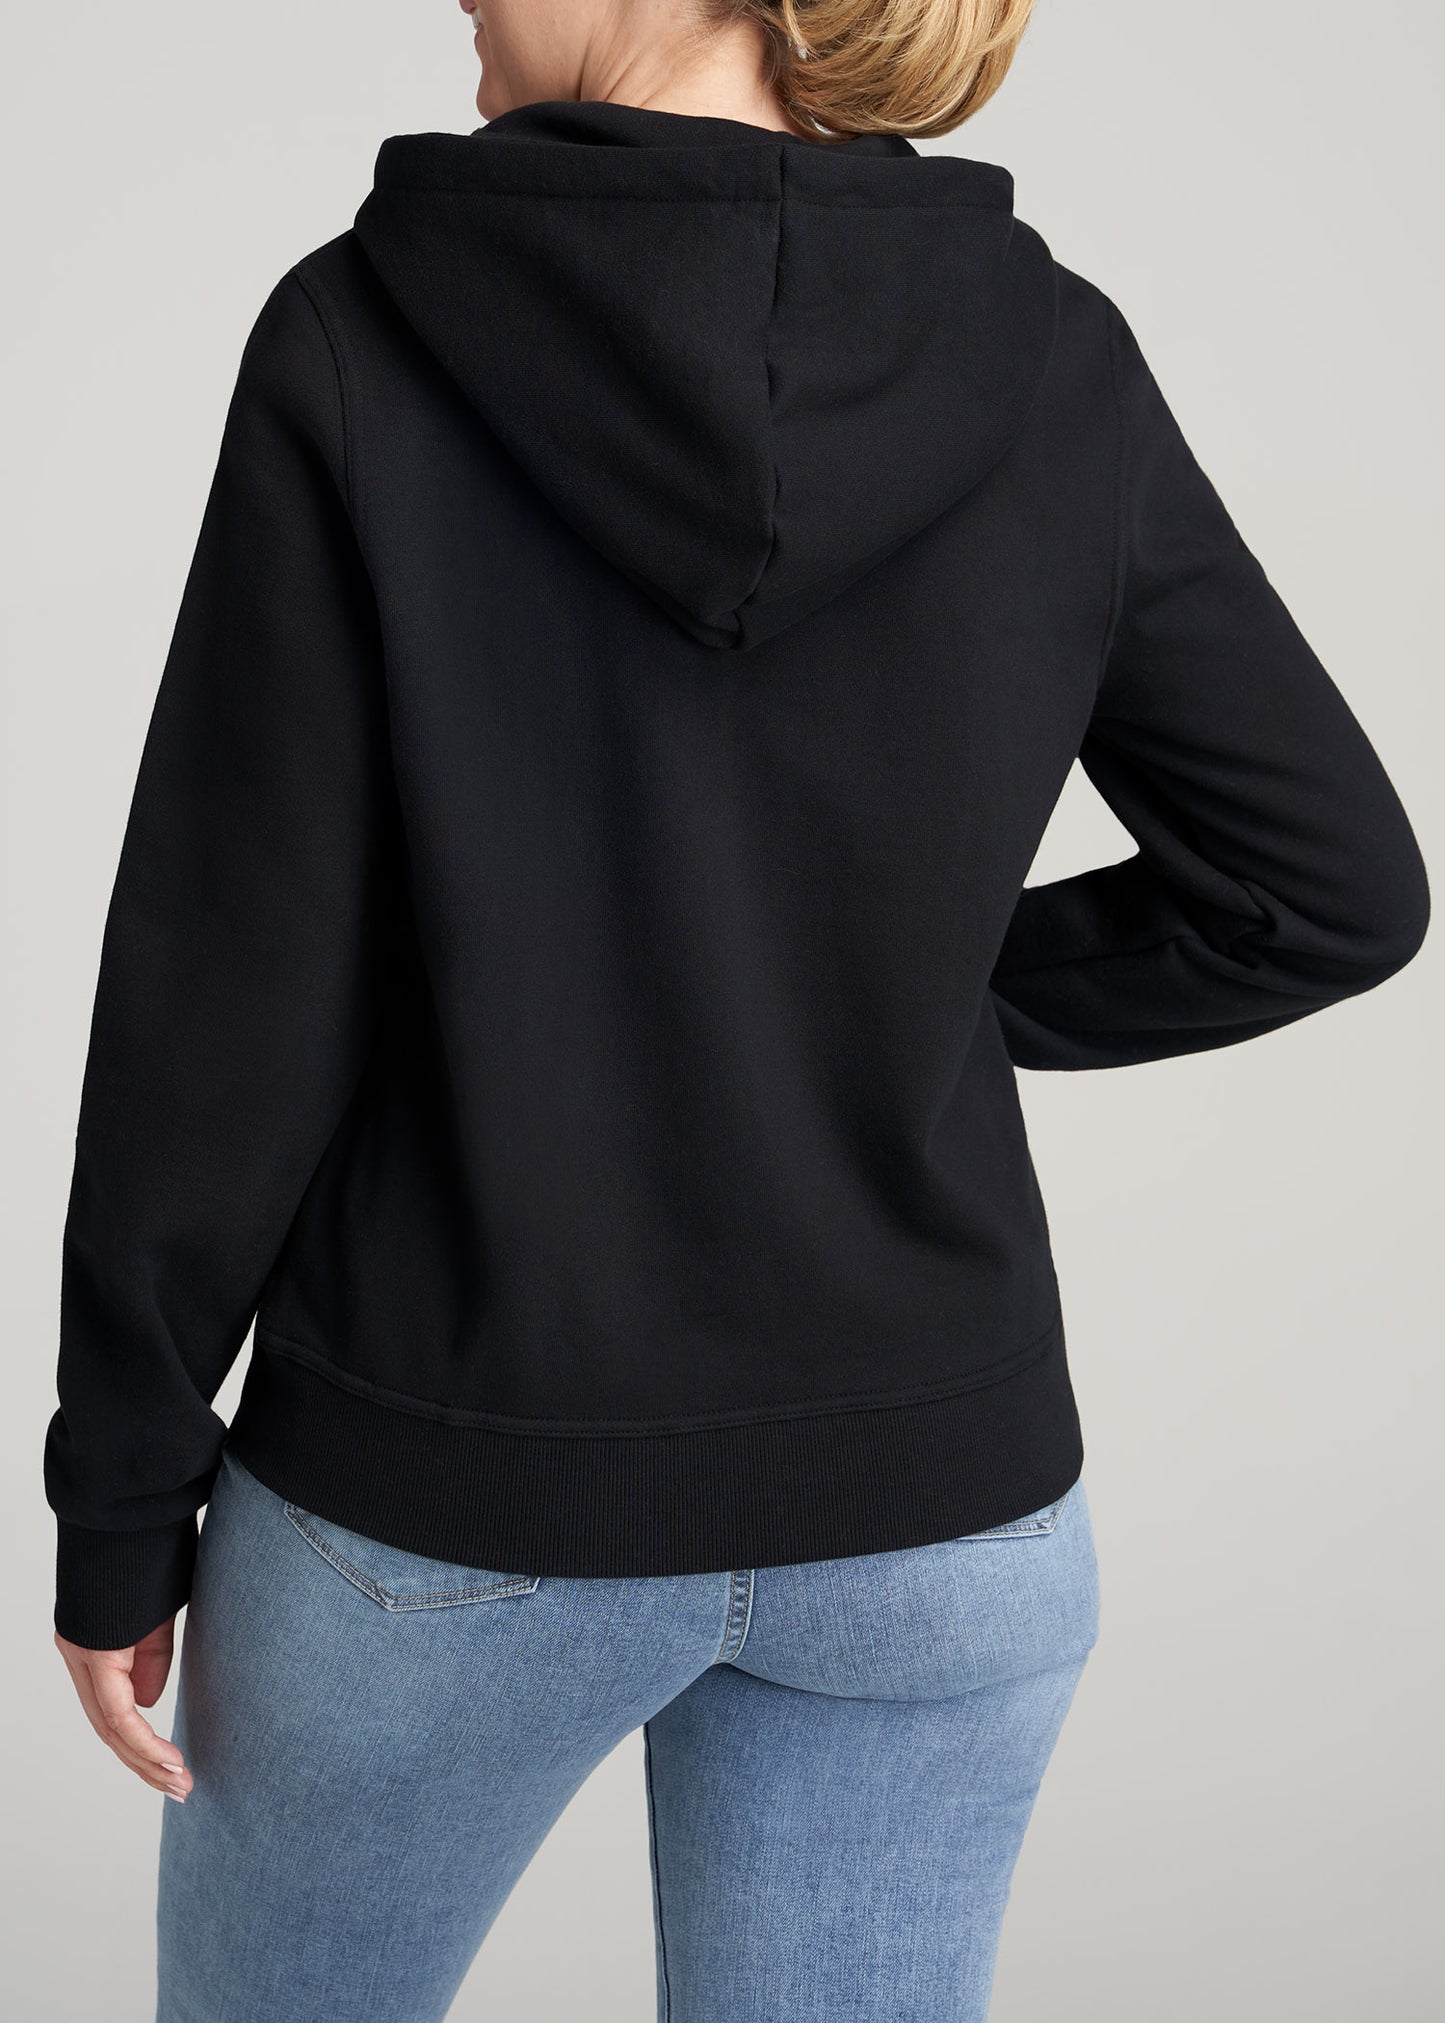 Basic, zip-up hoodie in faded black with two pockets and a